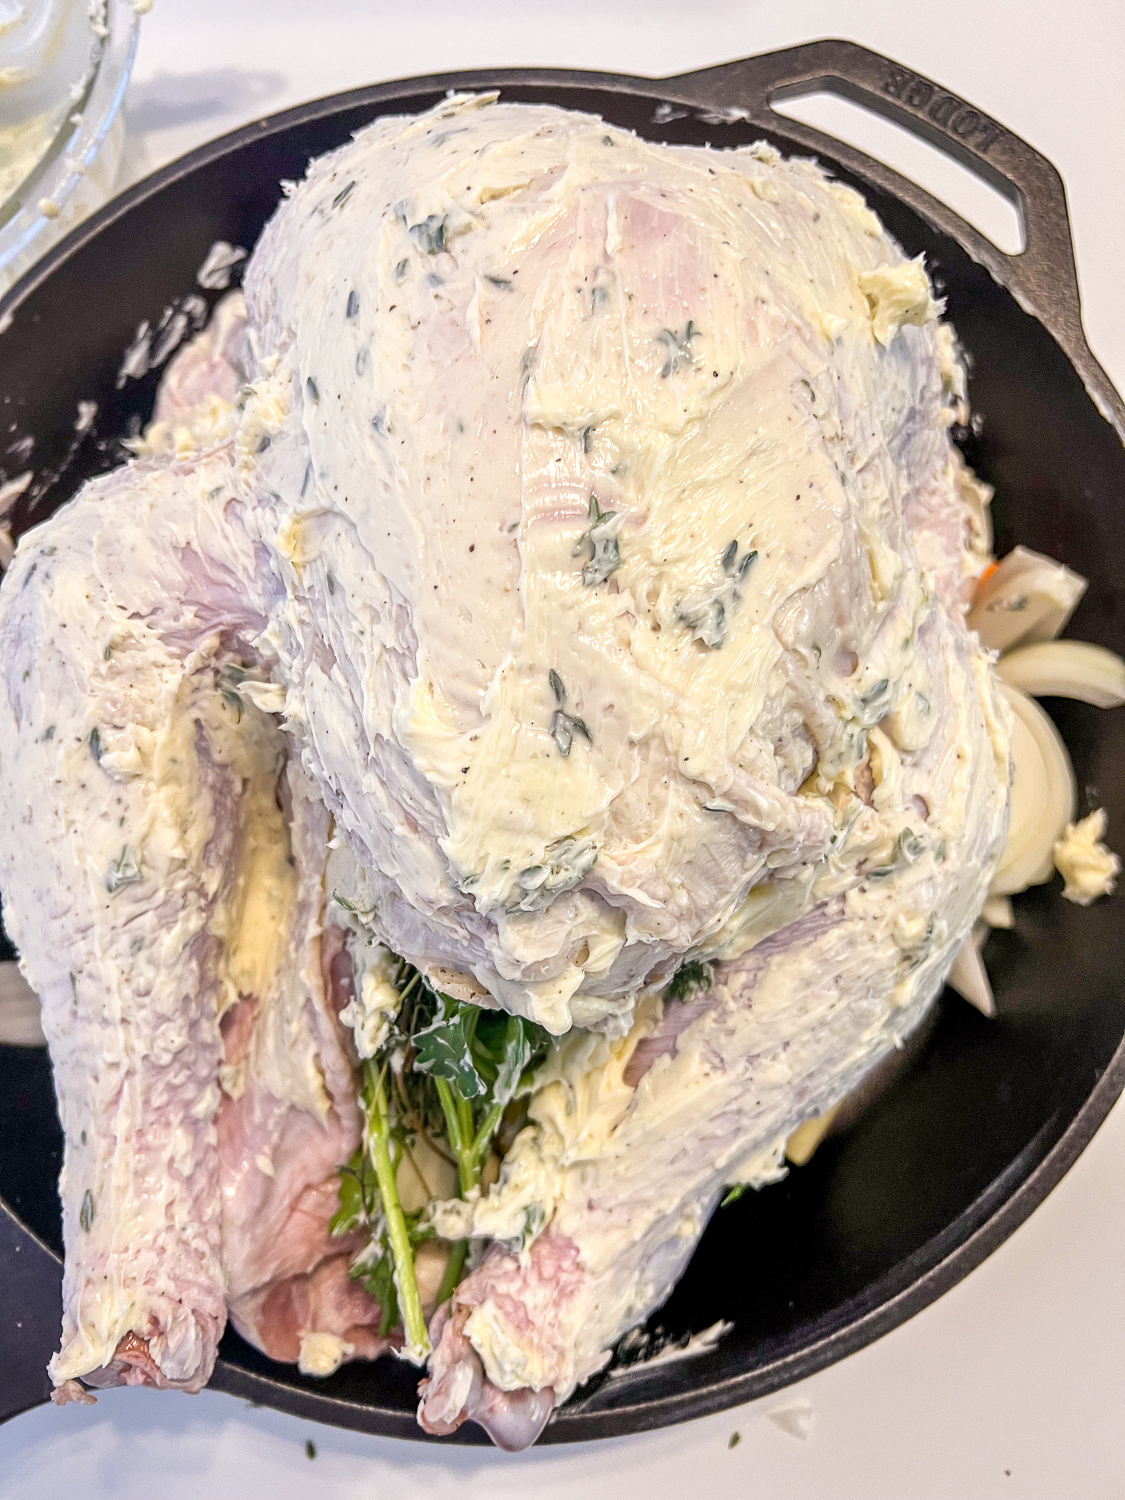 Herb butter has been applied all over the surface of the turkey.